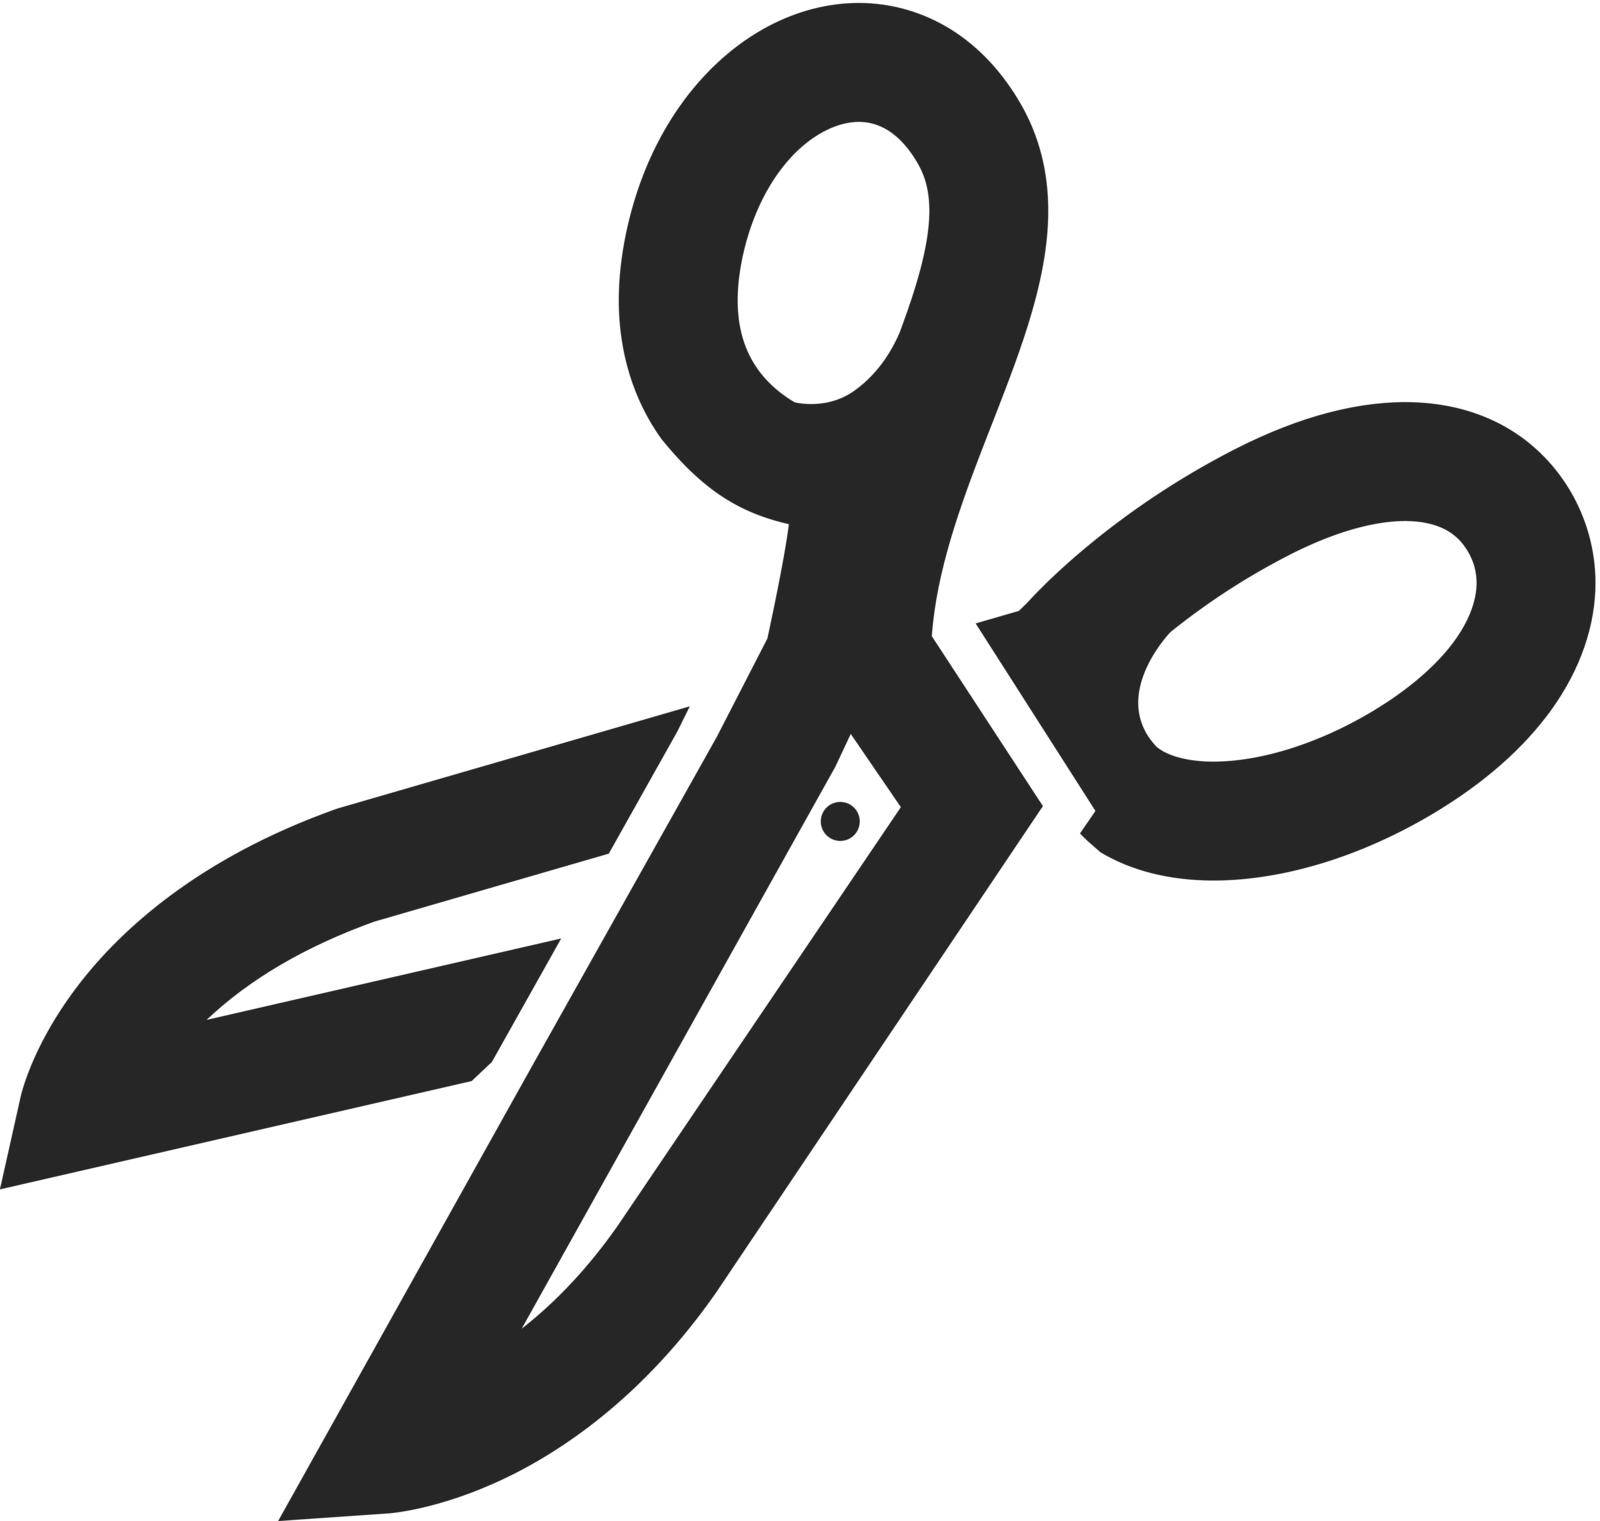 Scissor icon in thick outline style. Black and white monochrome vector illustration.